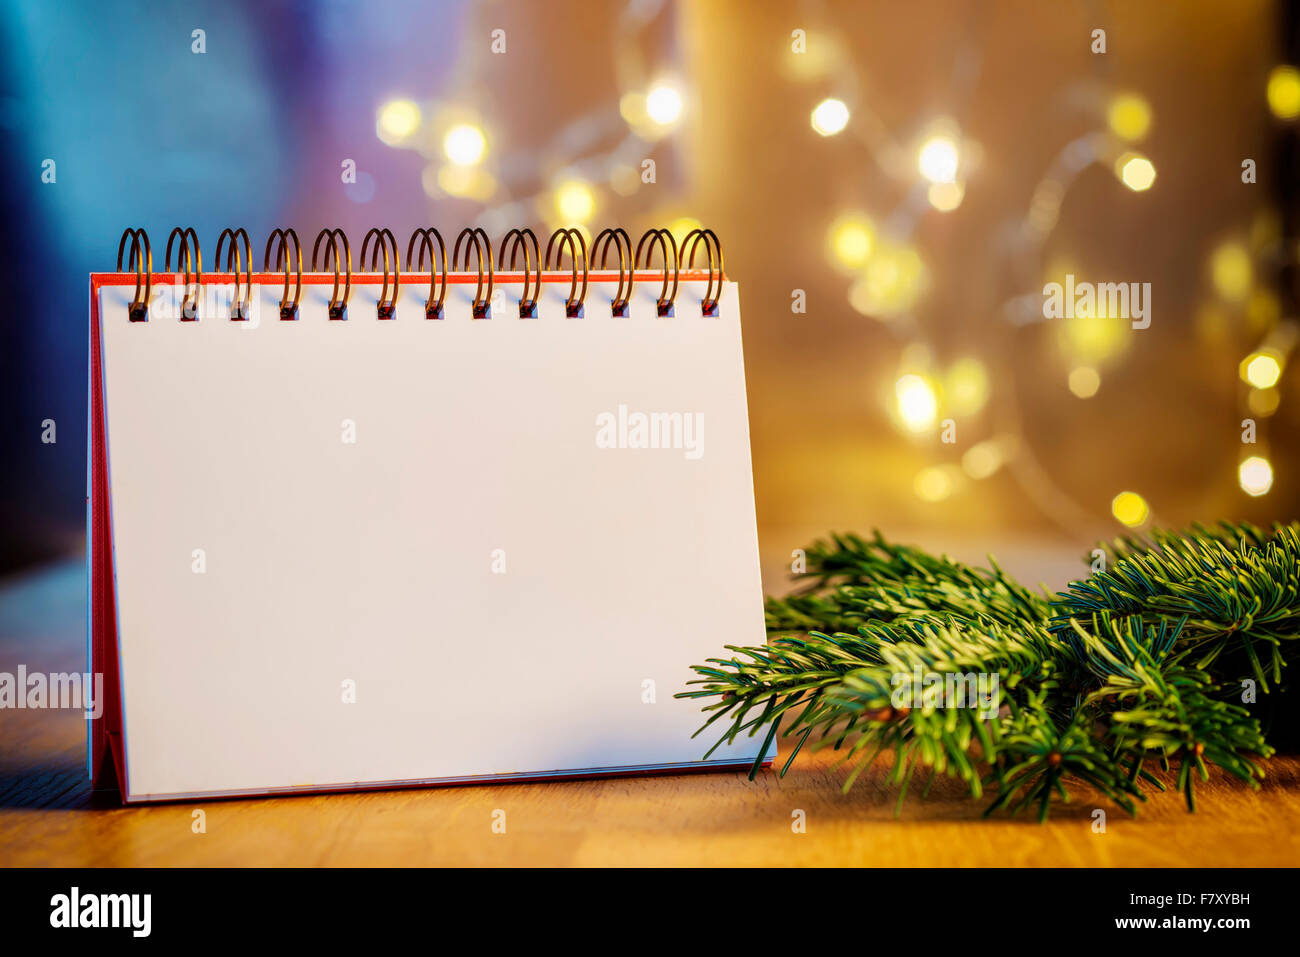 Image of empty ring binder with free space, branch and blur lights in background Stock Photo